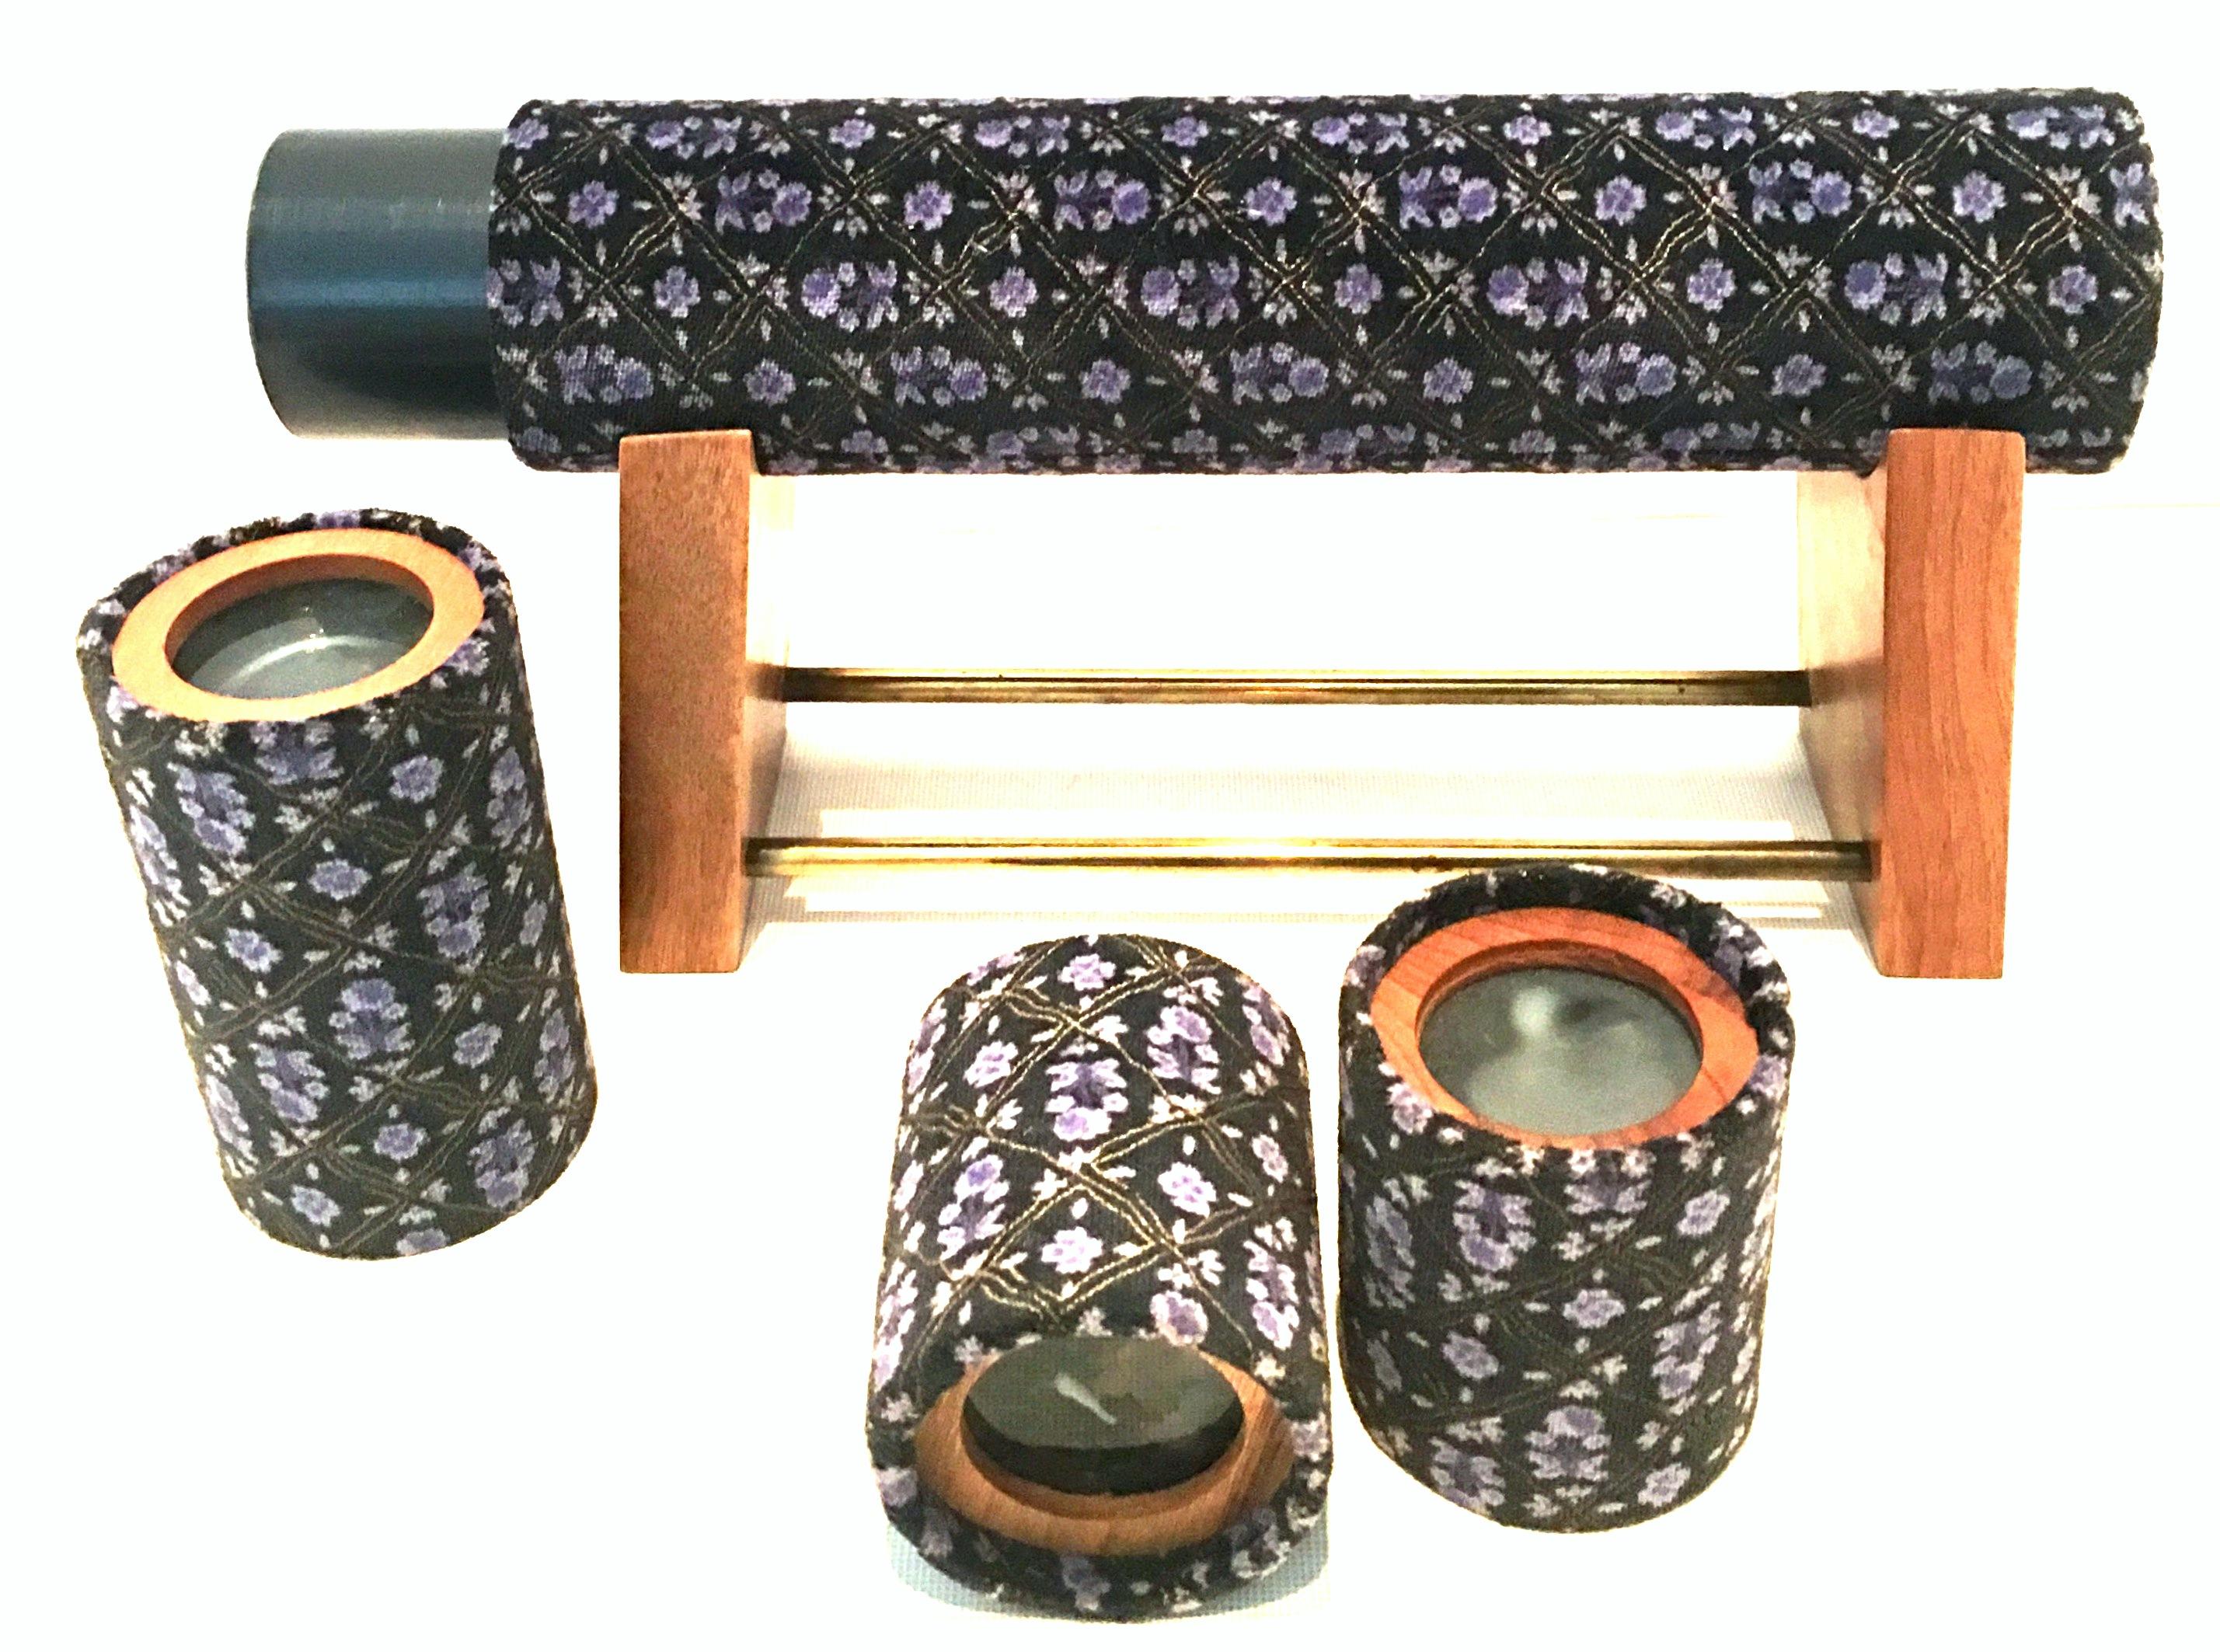 20th Century wood and Italian velvet handcrafted Kaleidoscope signed by, Craig Huber. This five piece set includes a teak wood and gilt brass stand, one primary 